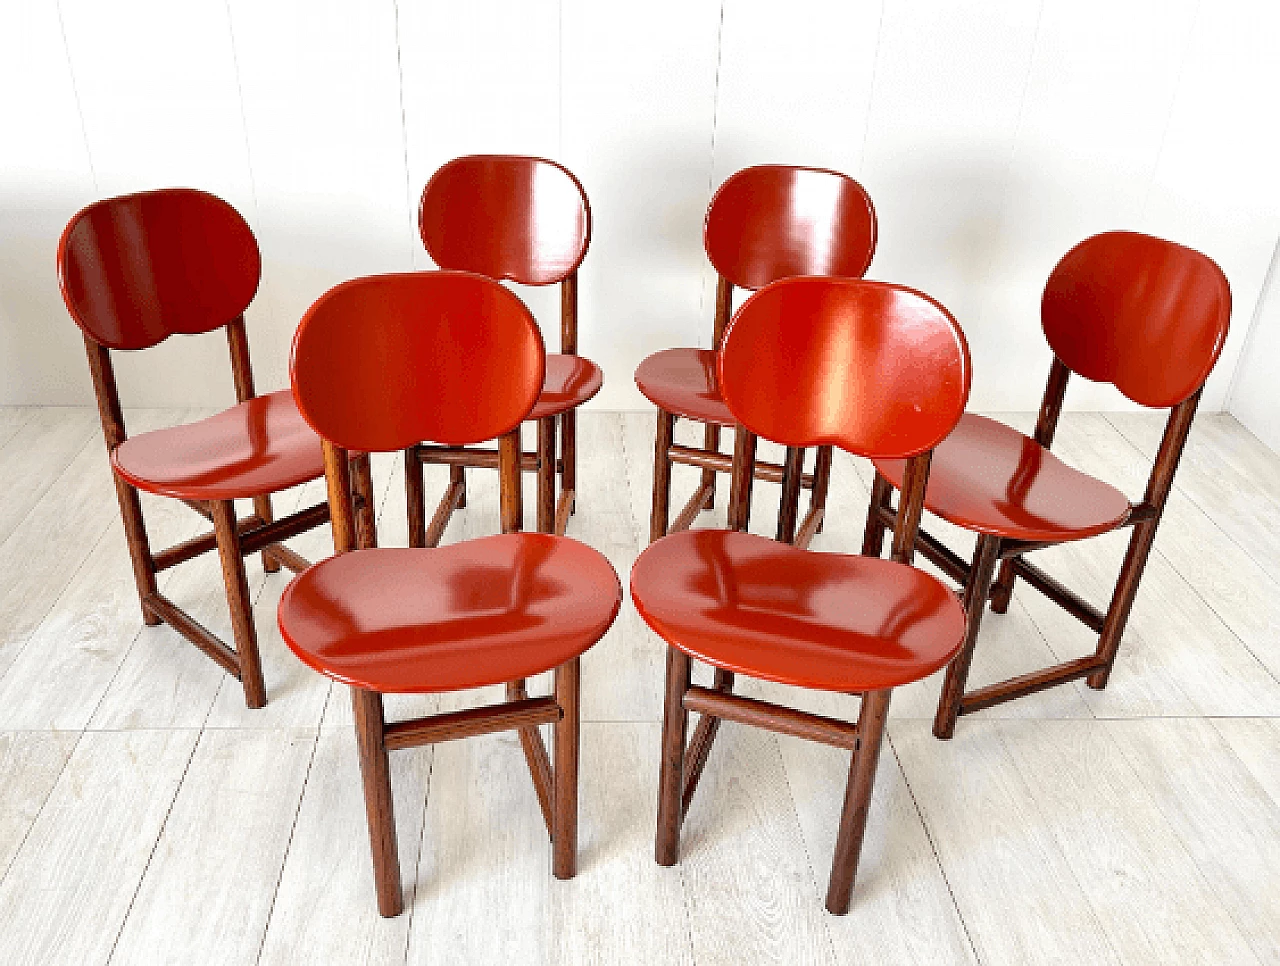 6 New Harmony chairs by Afra and Tobia Scarpa for Maxalto, 1970s 8